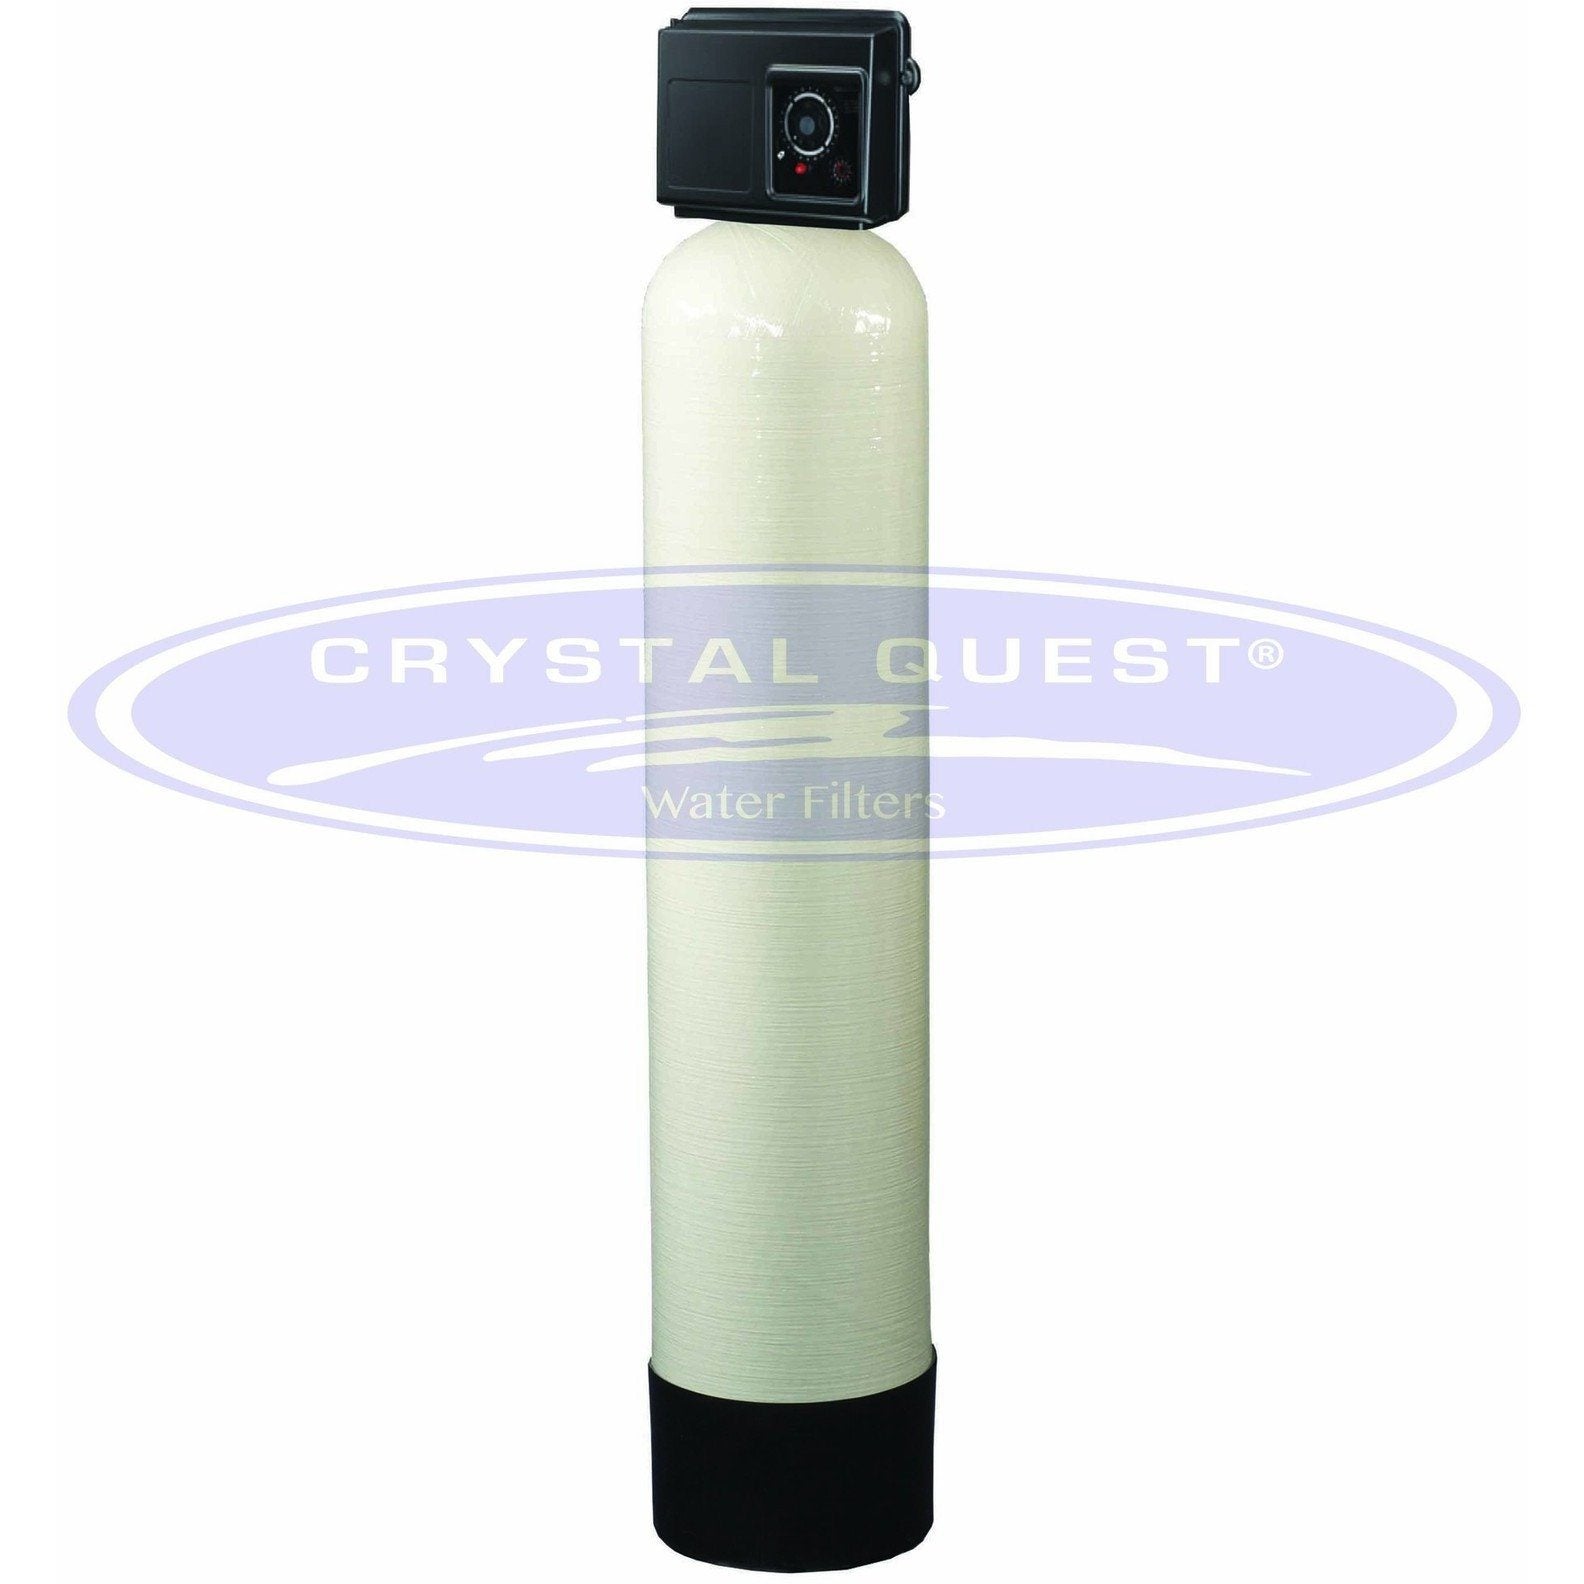 Crystal Quest Commercial/Industrial 14 GPM Demineralizer (DI) Water Filter System - 3 cu. ft.